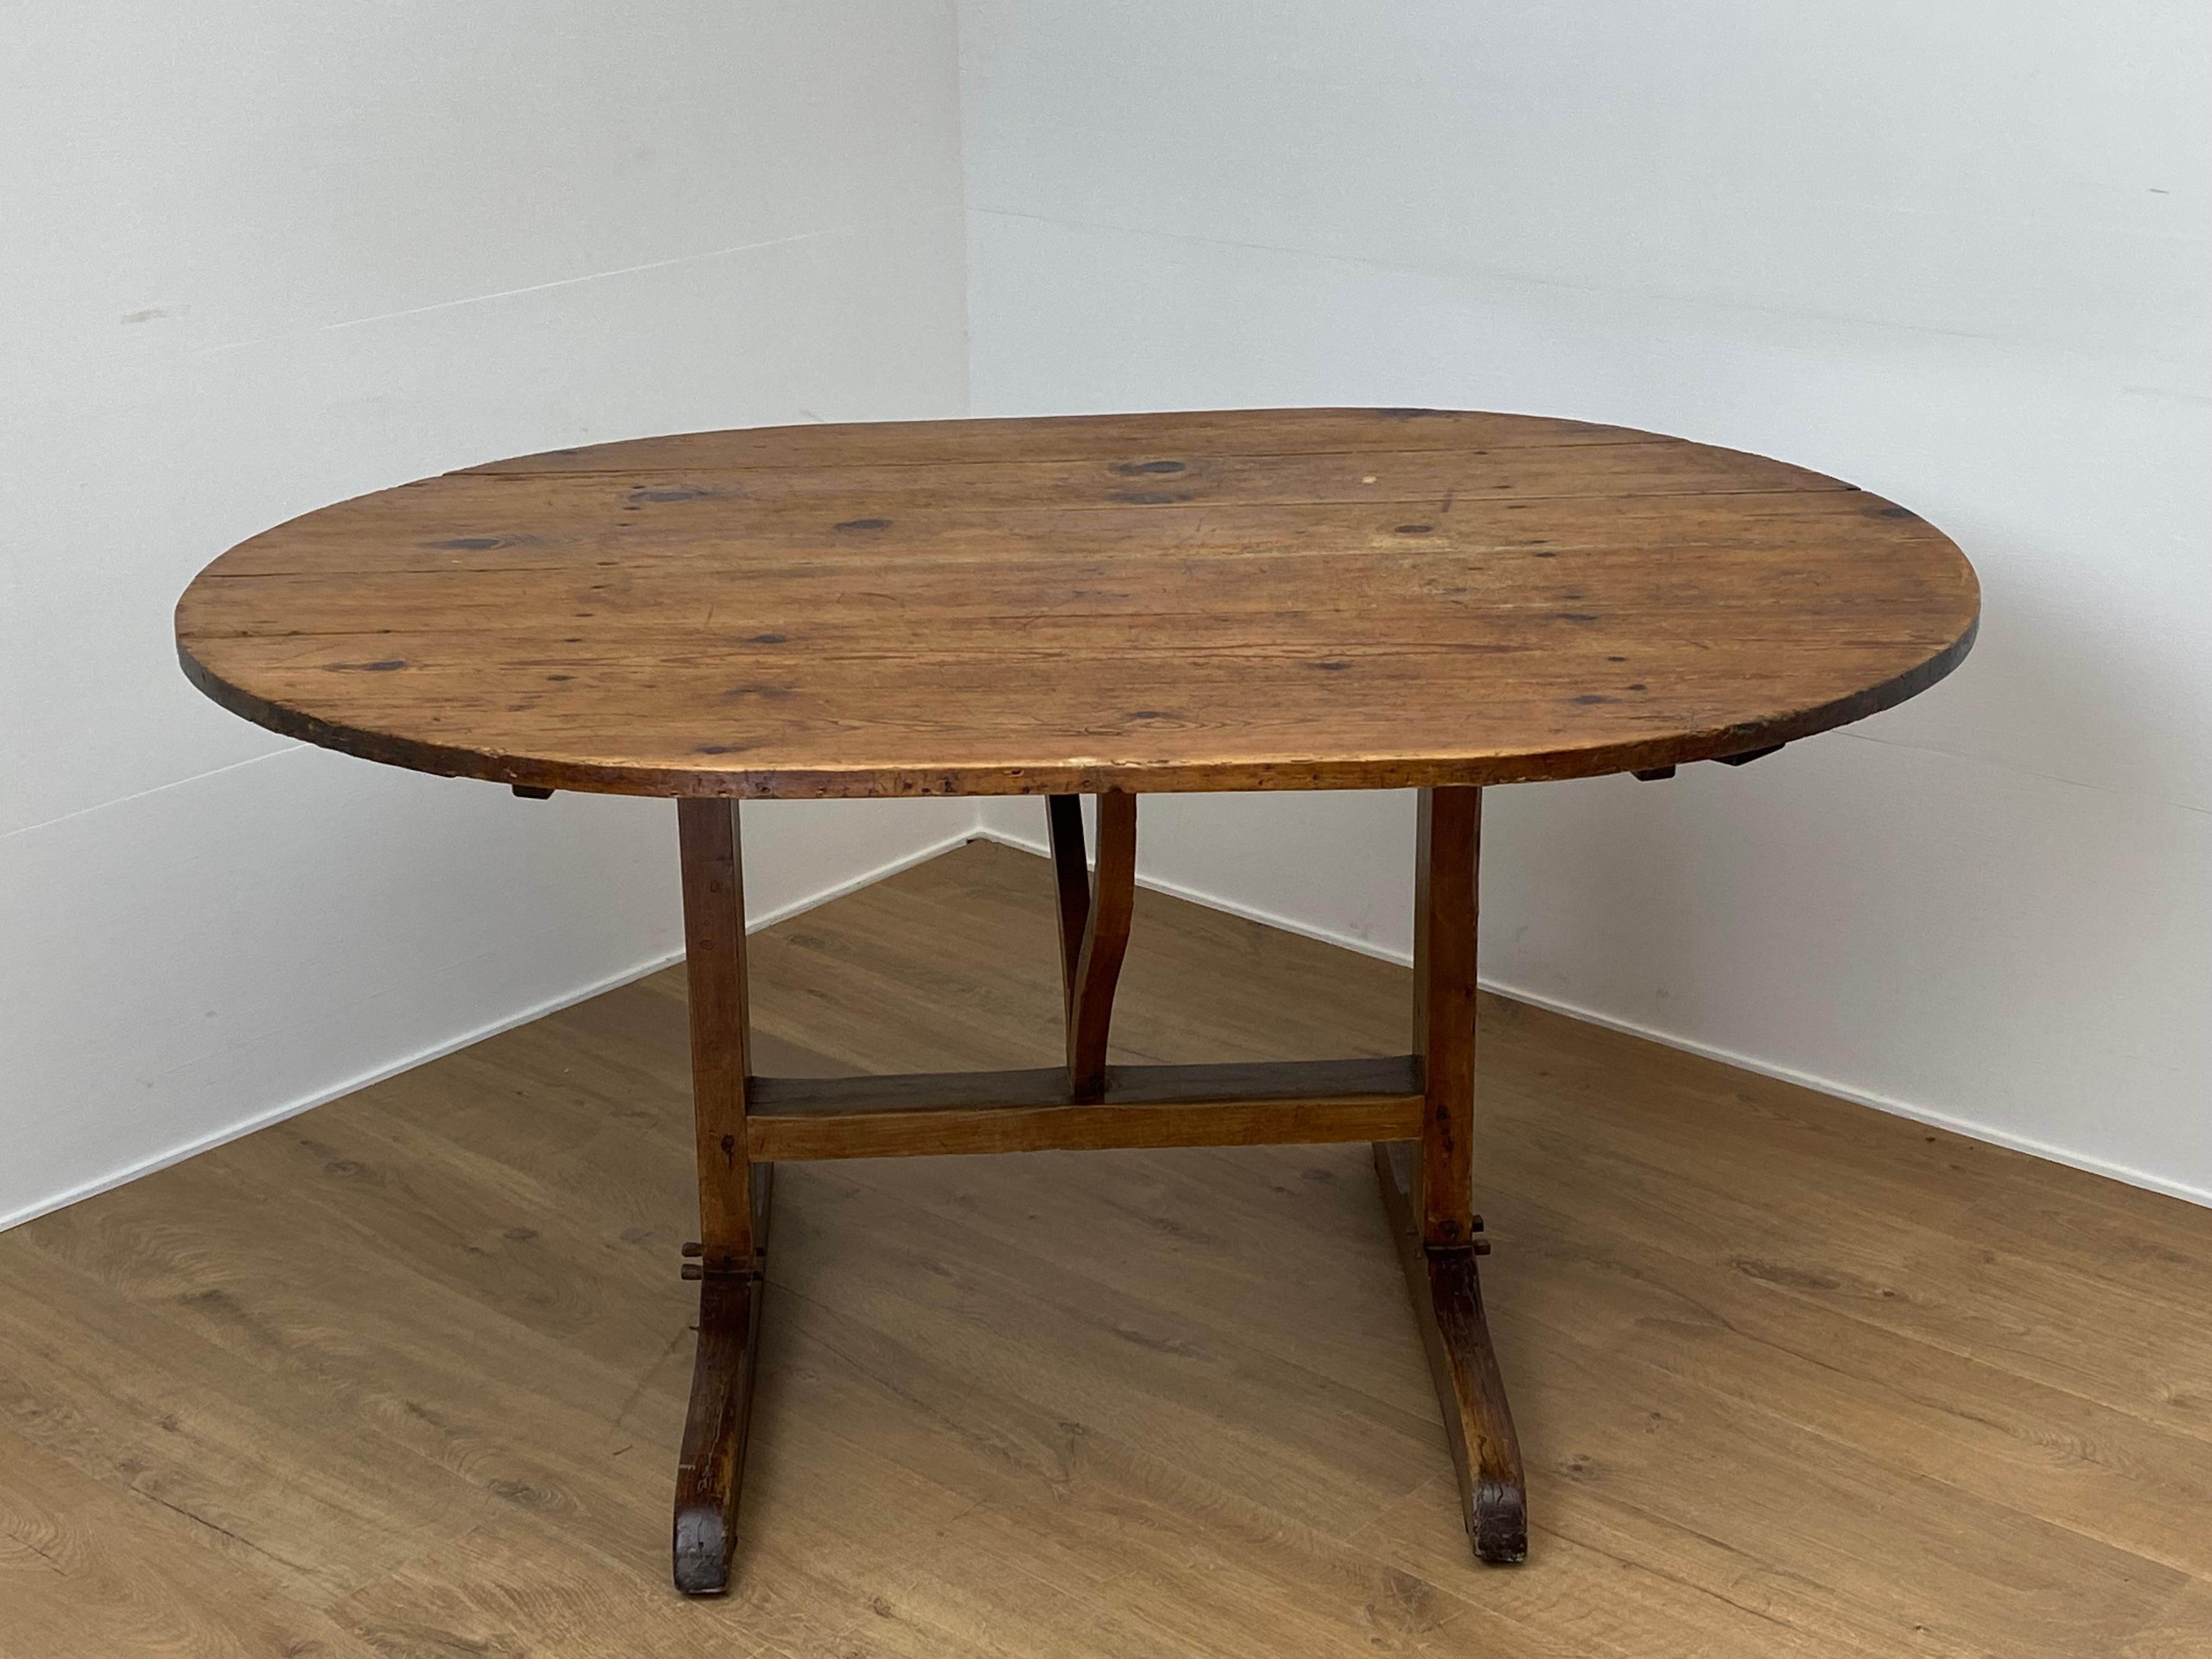 Beautiful Oval Vigneron Table from France in A Pine Wood,
from around 1920, special oval form, steady table,
good old, original patina and shine of the wood,
can be placed on various locations 